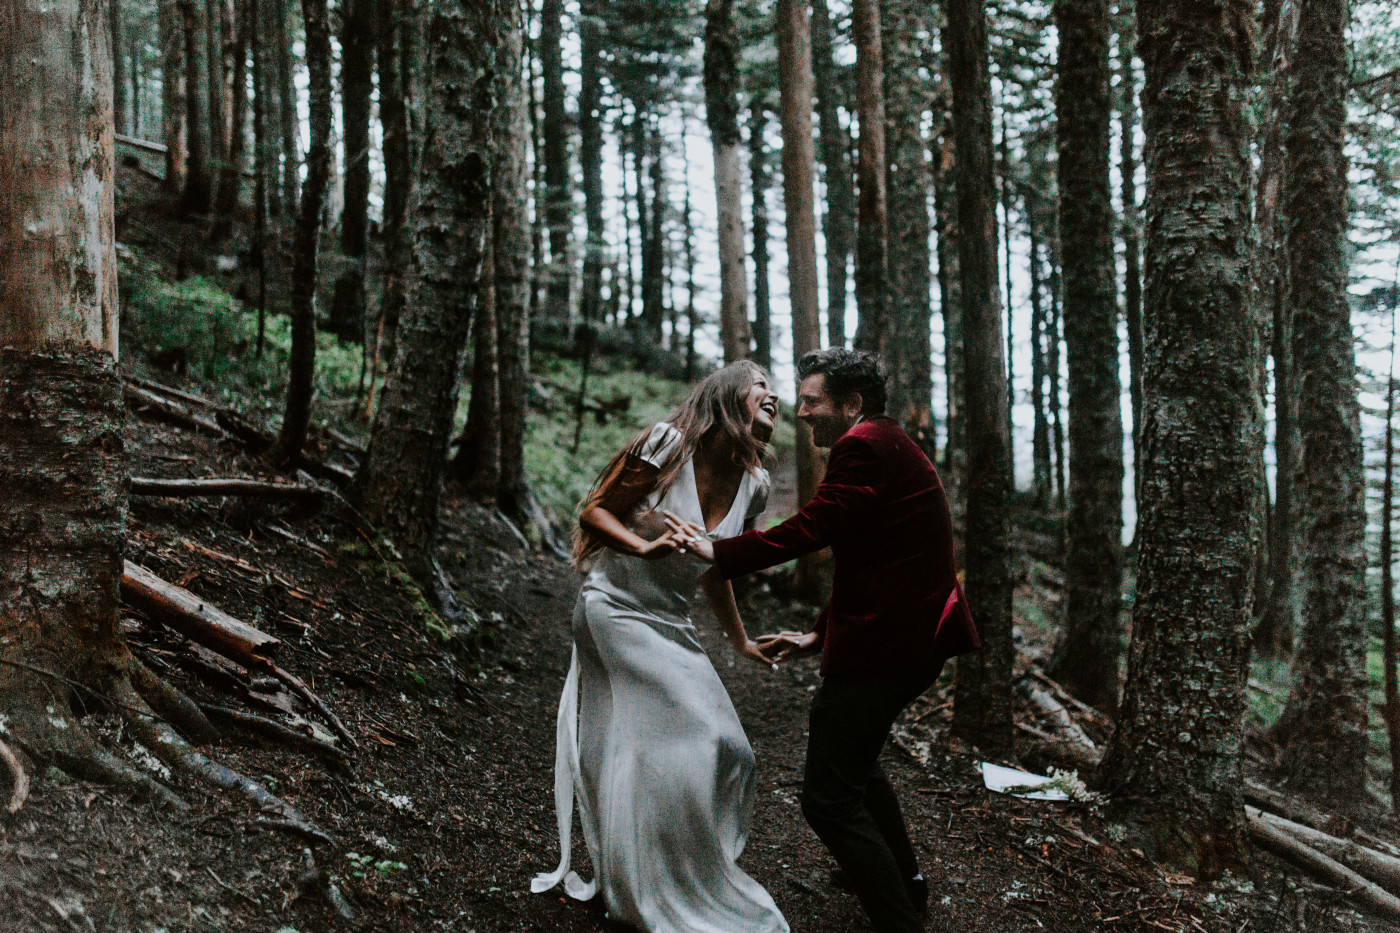 Katelyn and Murray dance. Elopement wedding photography at Mount Hood by Sienna Plus Josh.